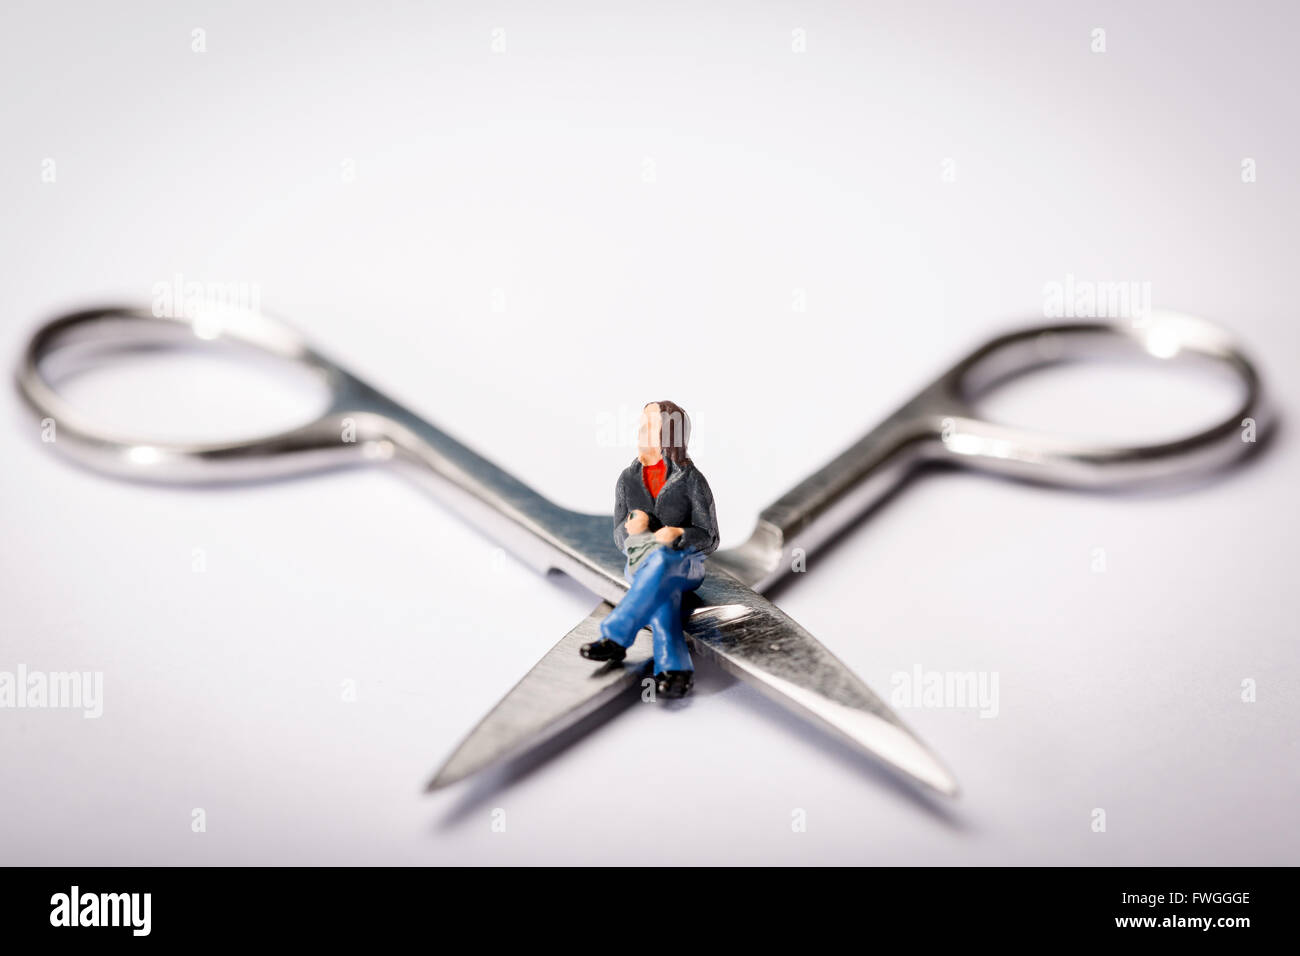 Vasectomy concept image of a miniature figure sat cross legged on a pair of scissors Stock Photo